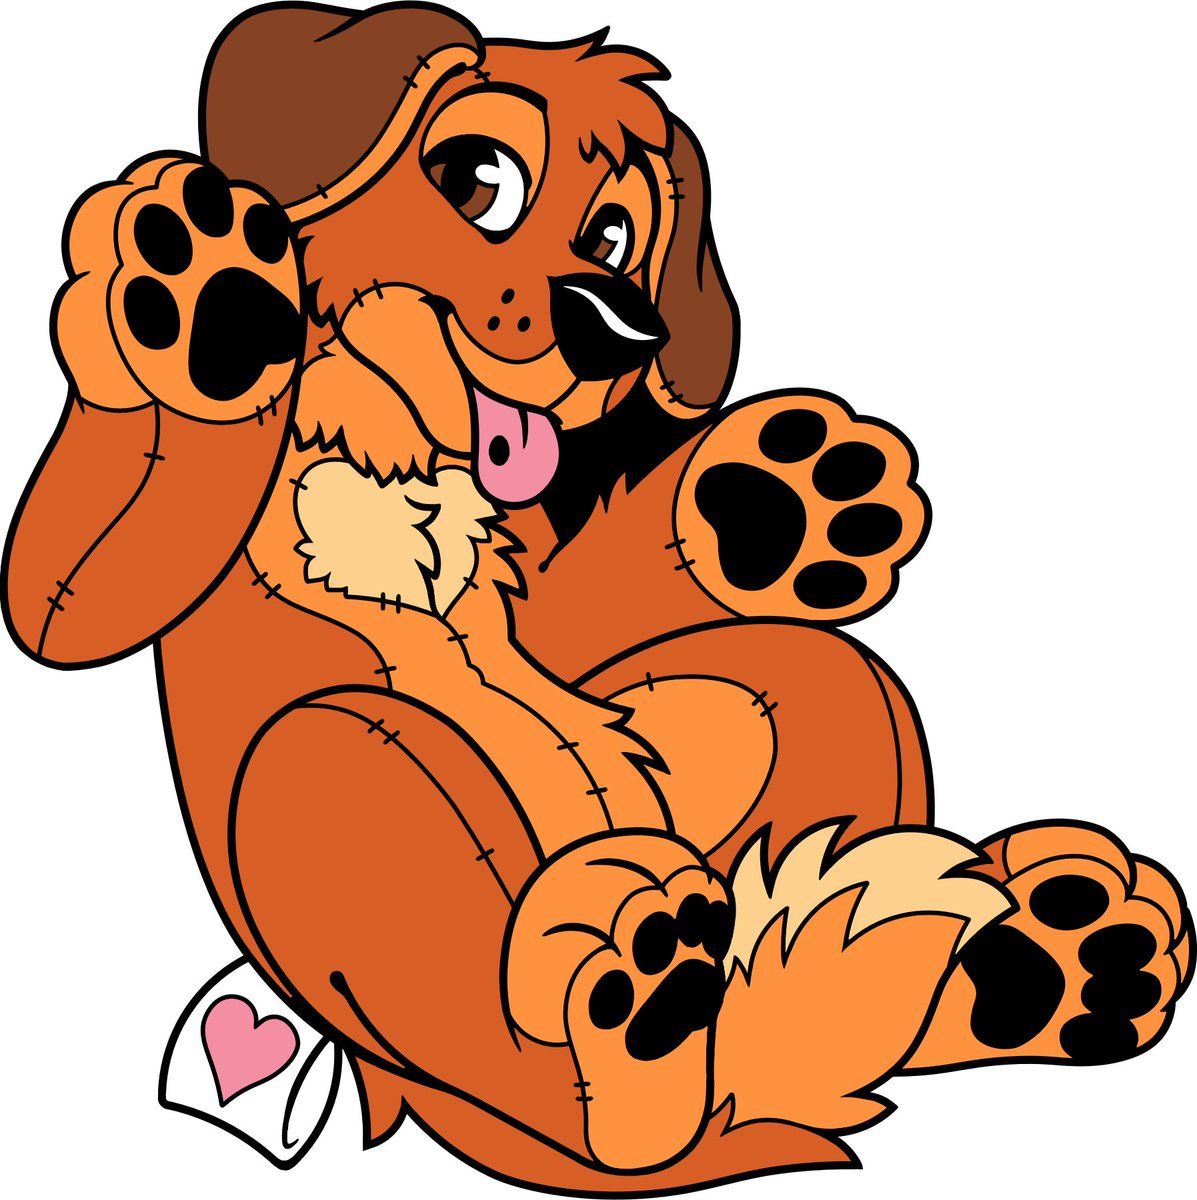 Poofy Pins also does plushie and pooltoy characters! 

This cutie is for @Didge_The_Dog! 

#enamelpins #furrypins #furry #furryart #plushie